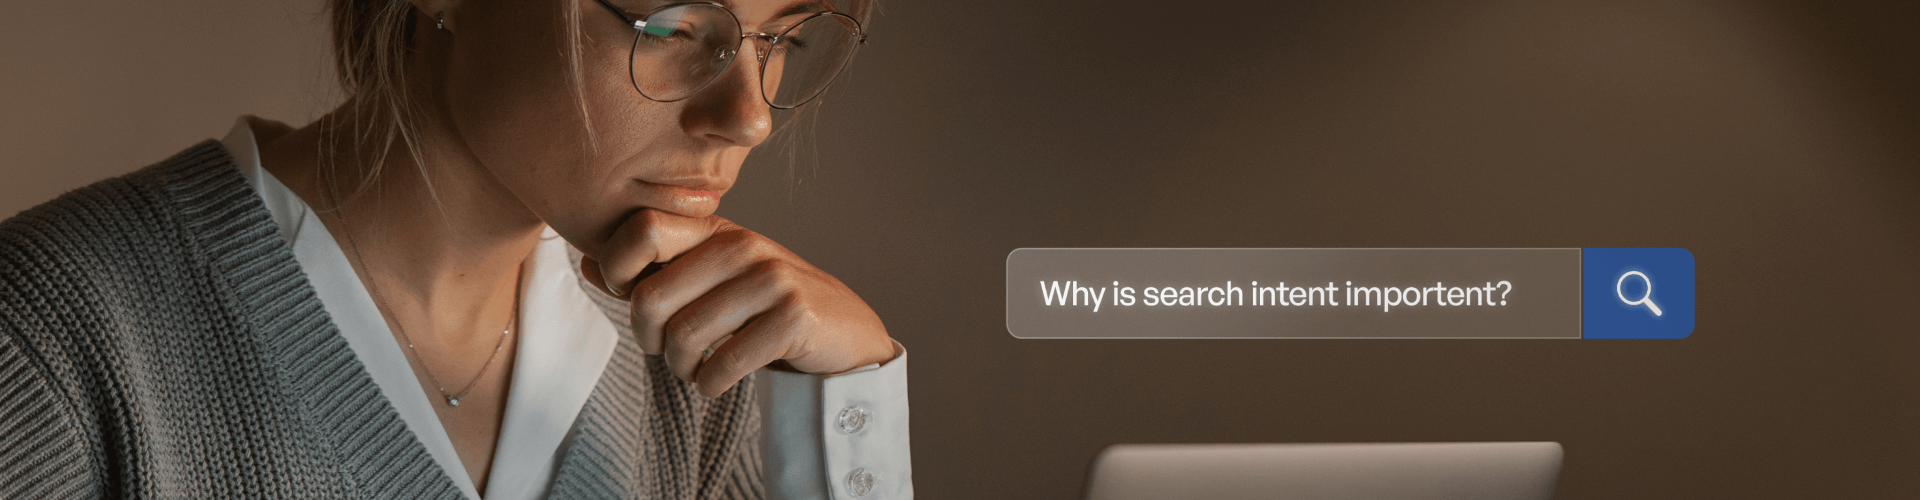 WHY IS SEARCH UNTEND IMPORTANT FOR SER